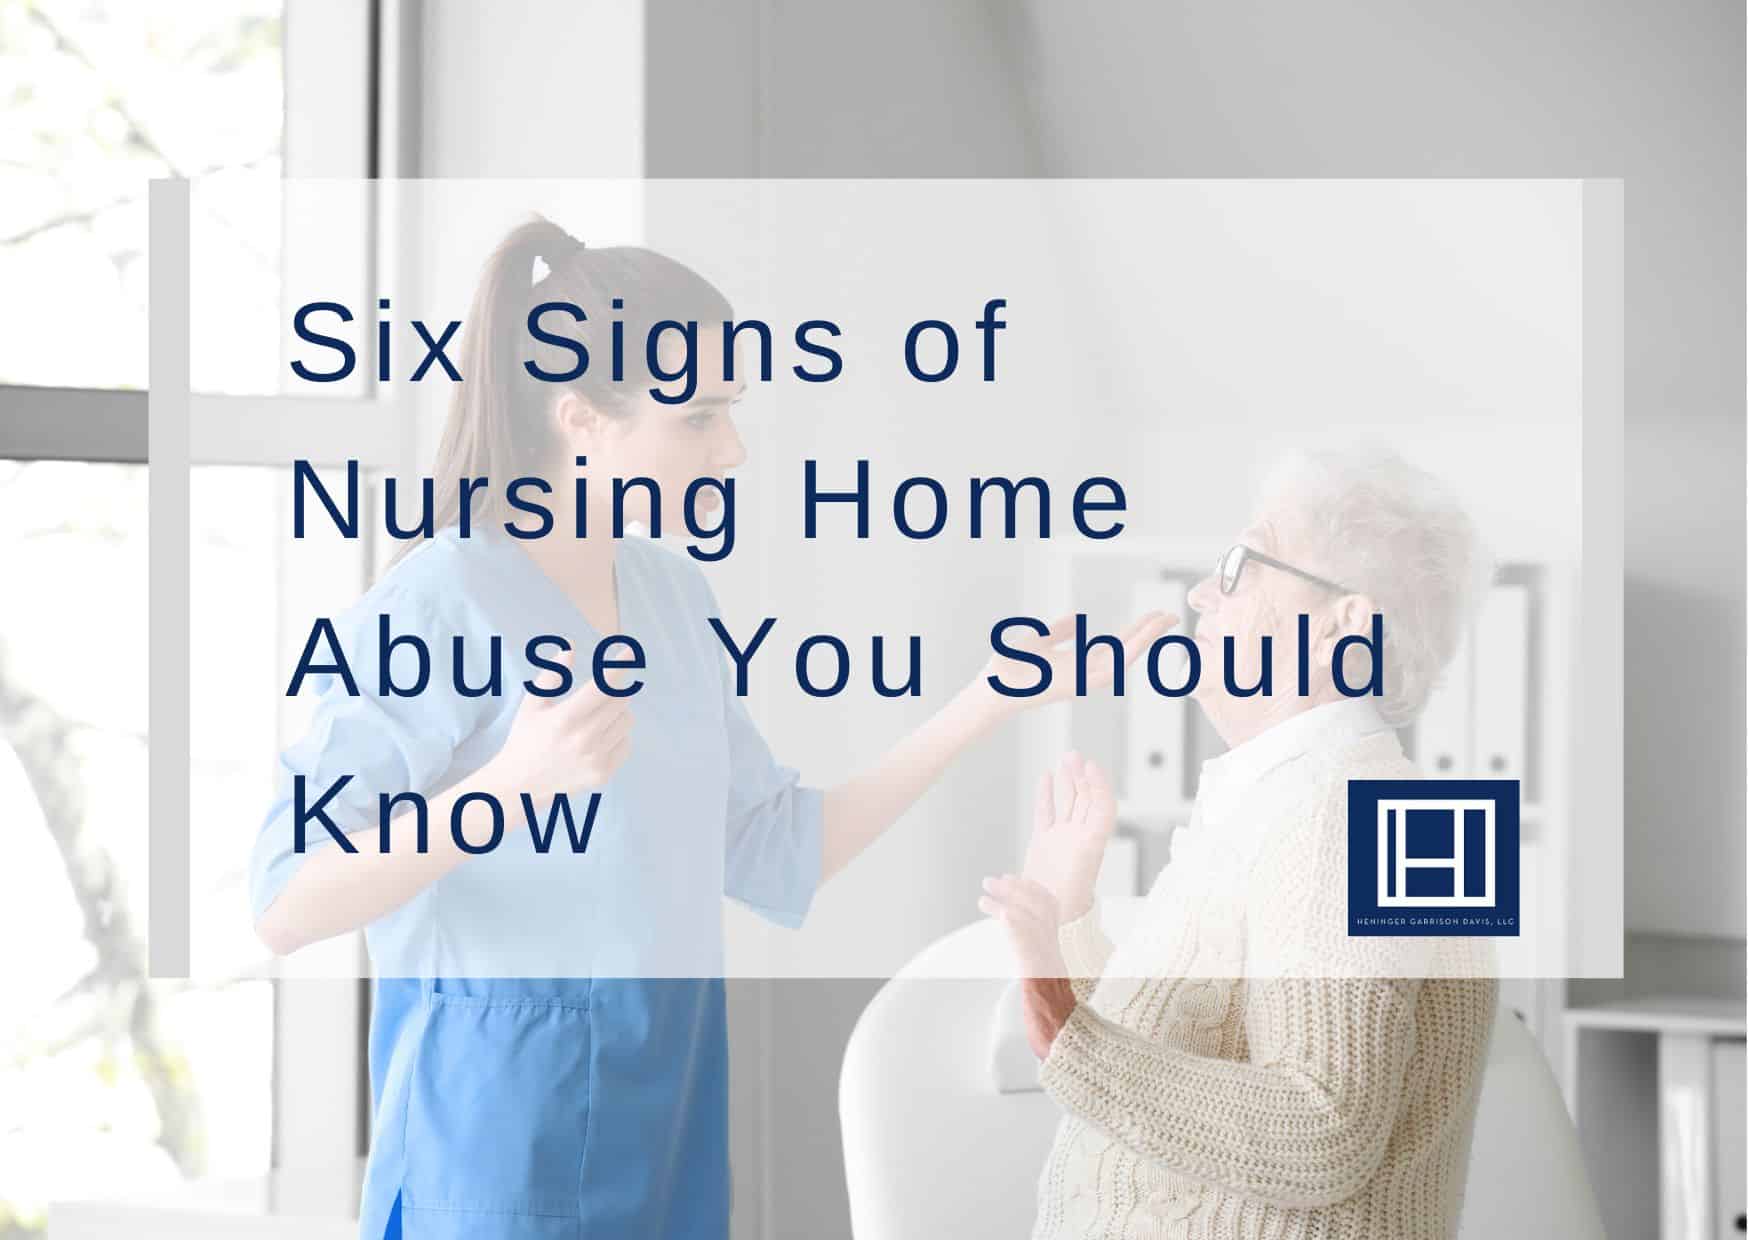 Six Signs of Nursing Home Abuse You Should Know